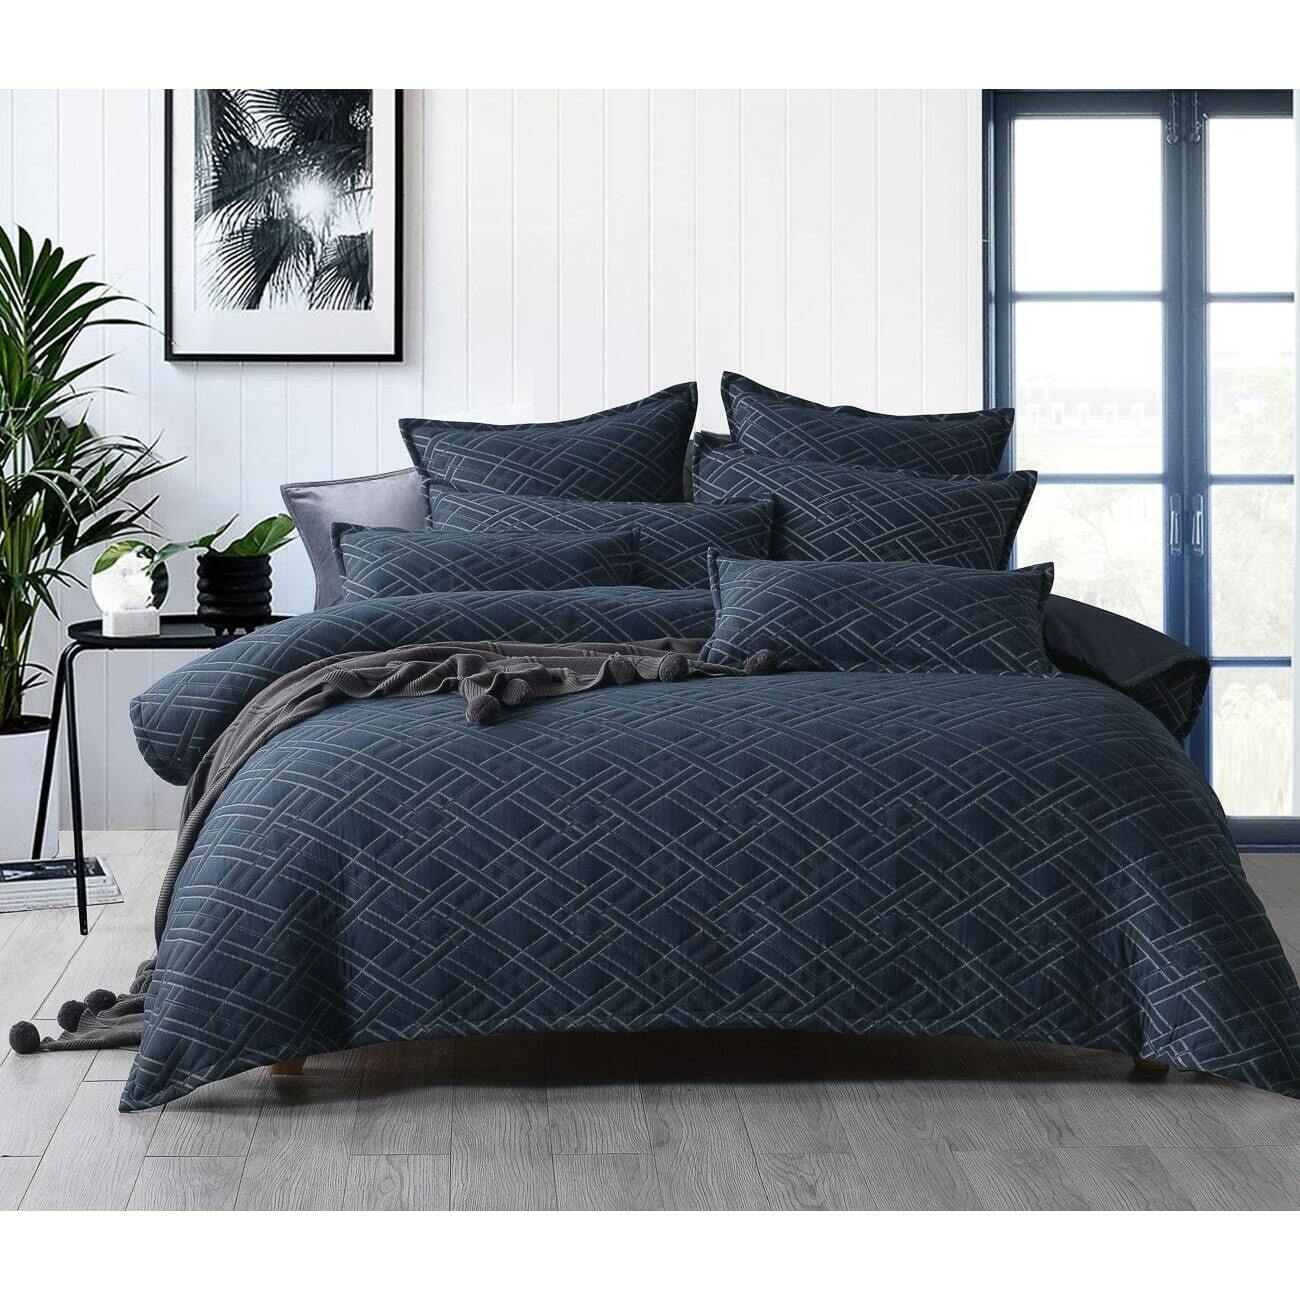 Blaze Navy Quilt Cover Set [SIZE: King Bed]